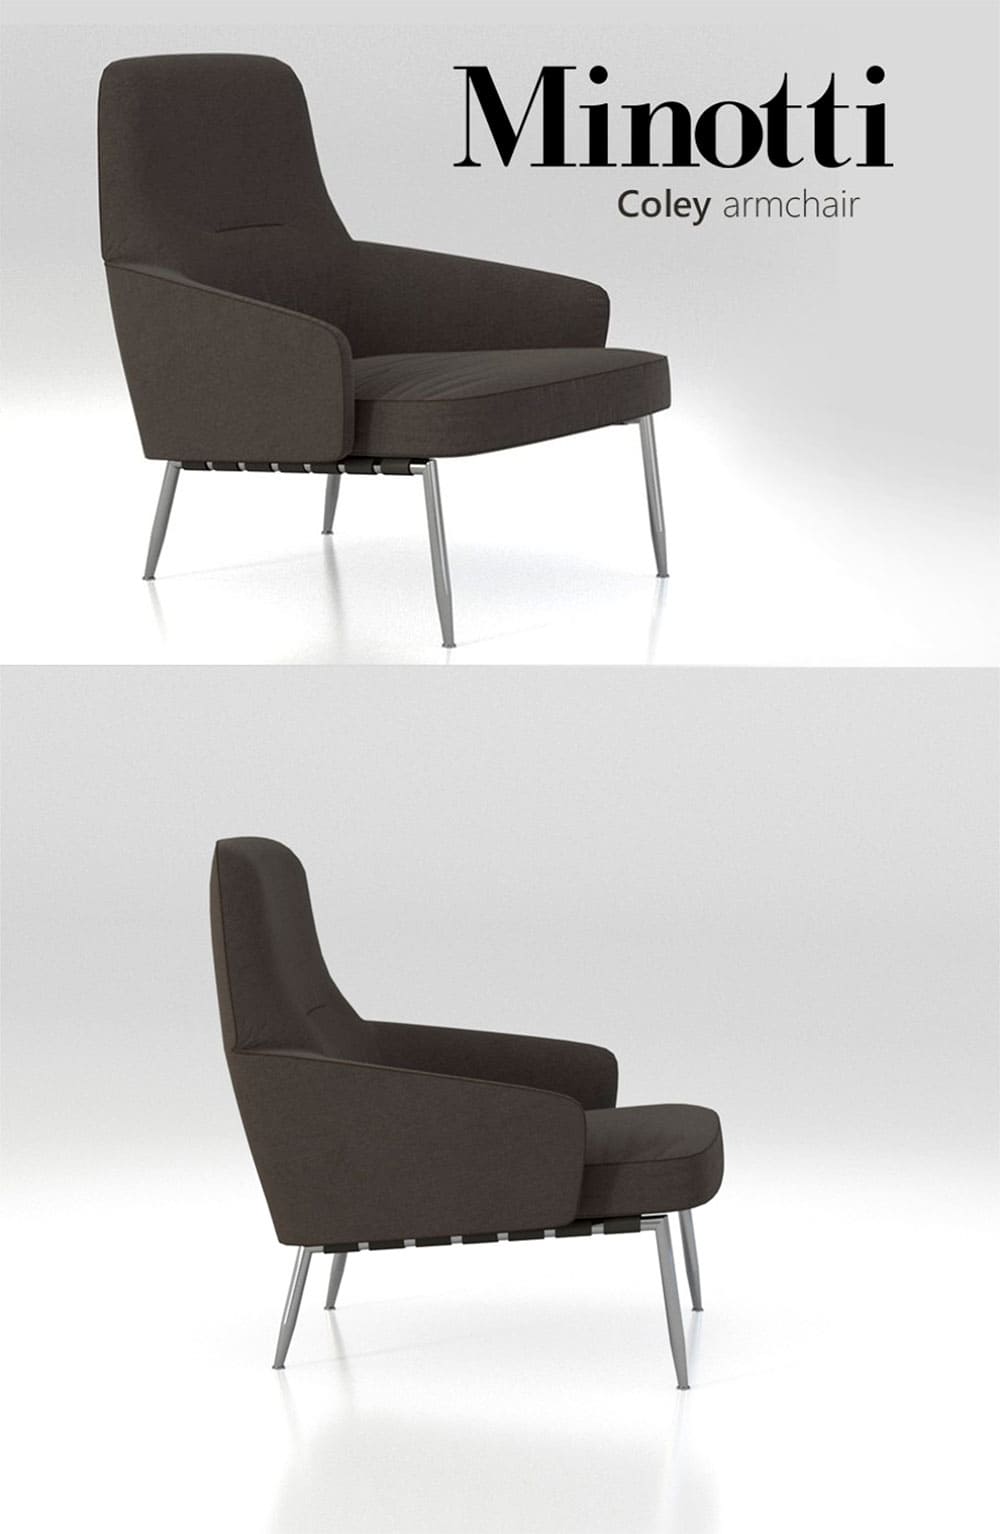 Minotti coley armchair, picture for pinterest.